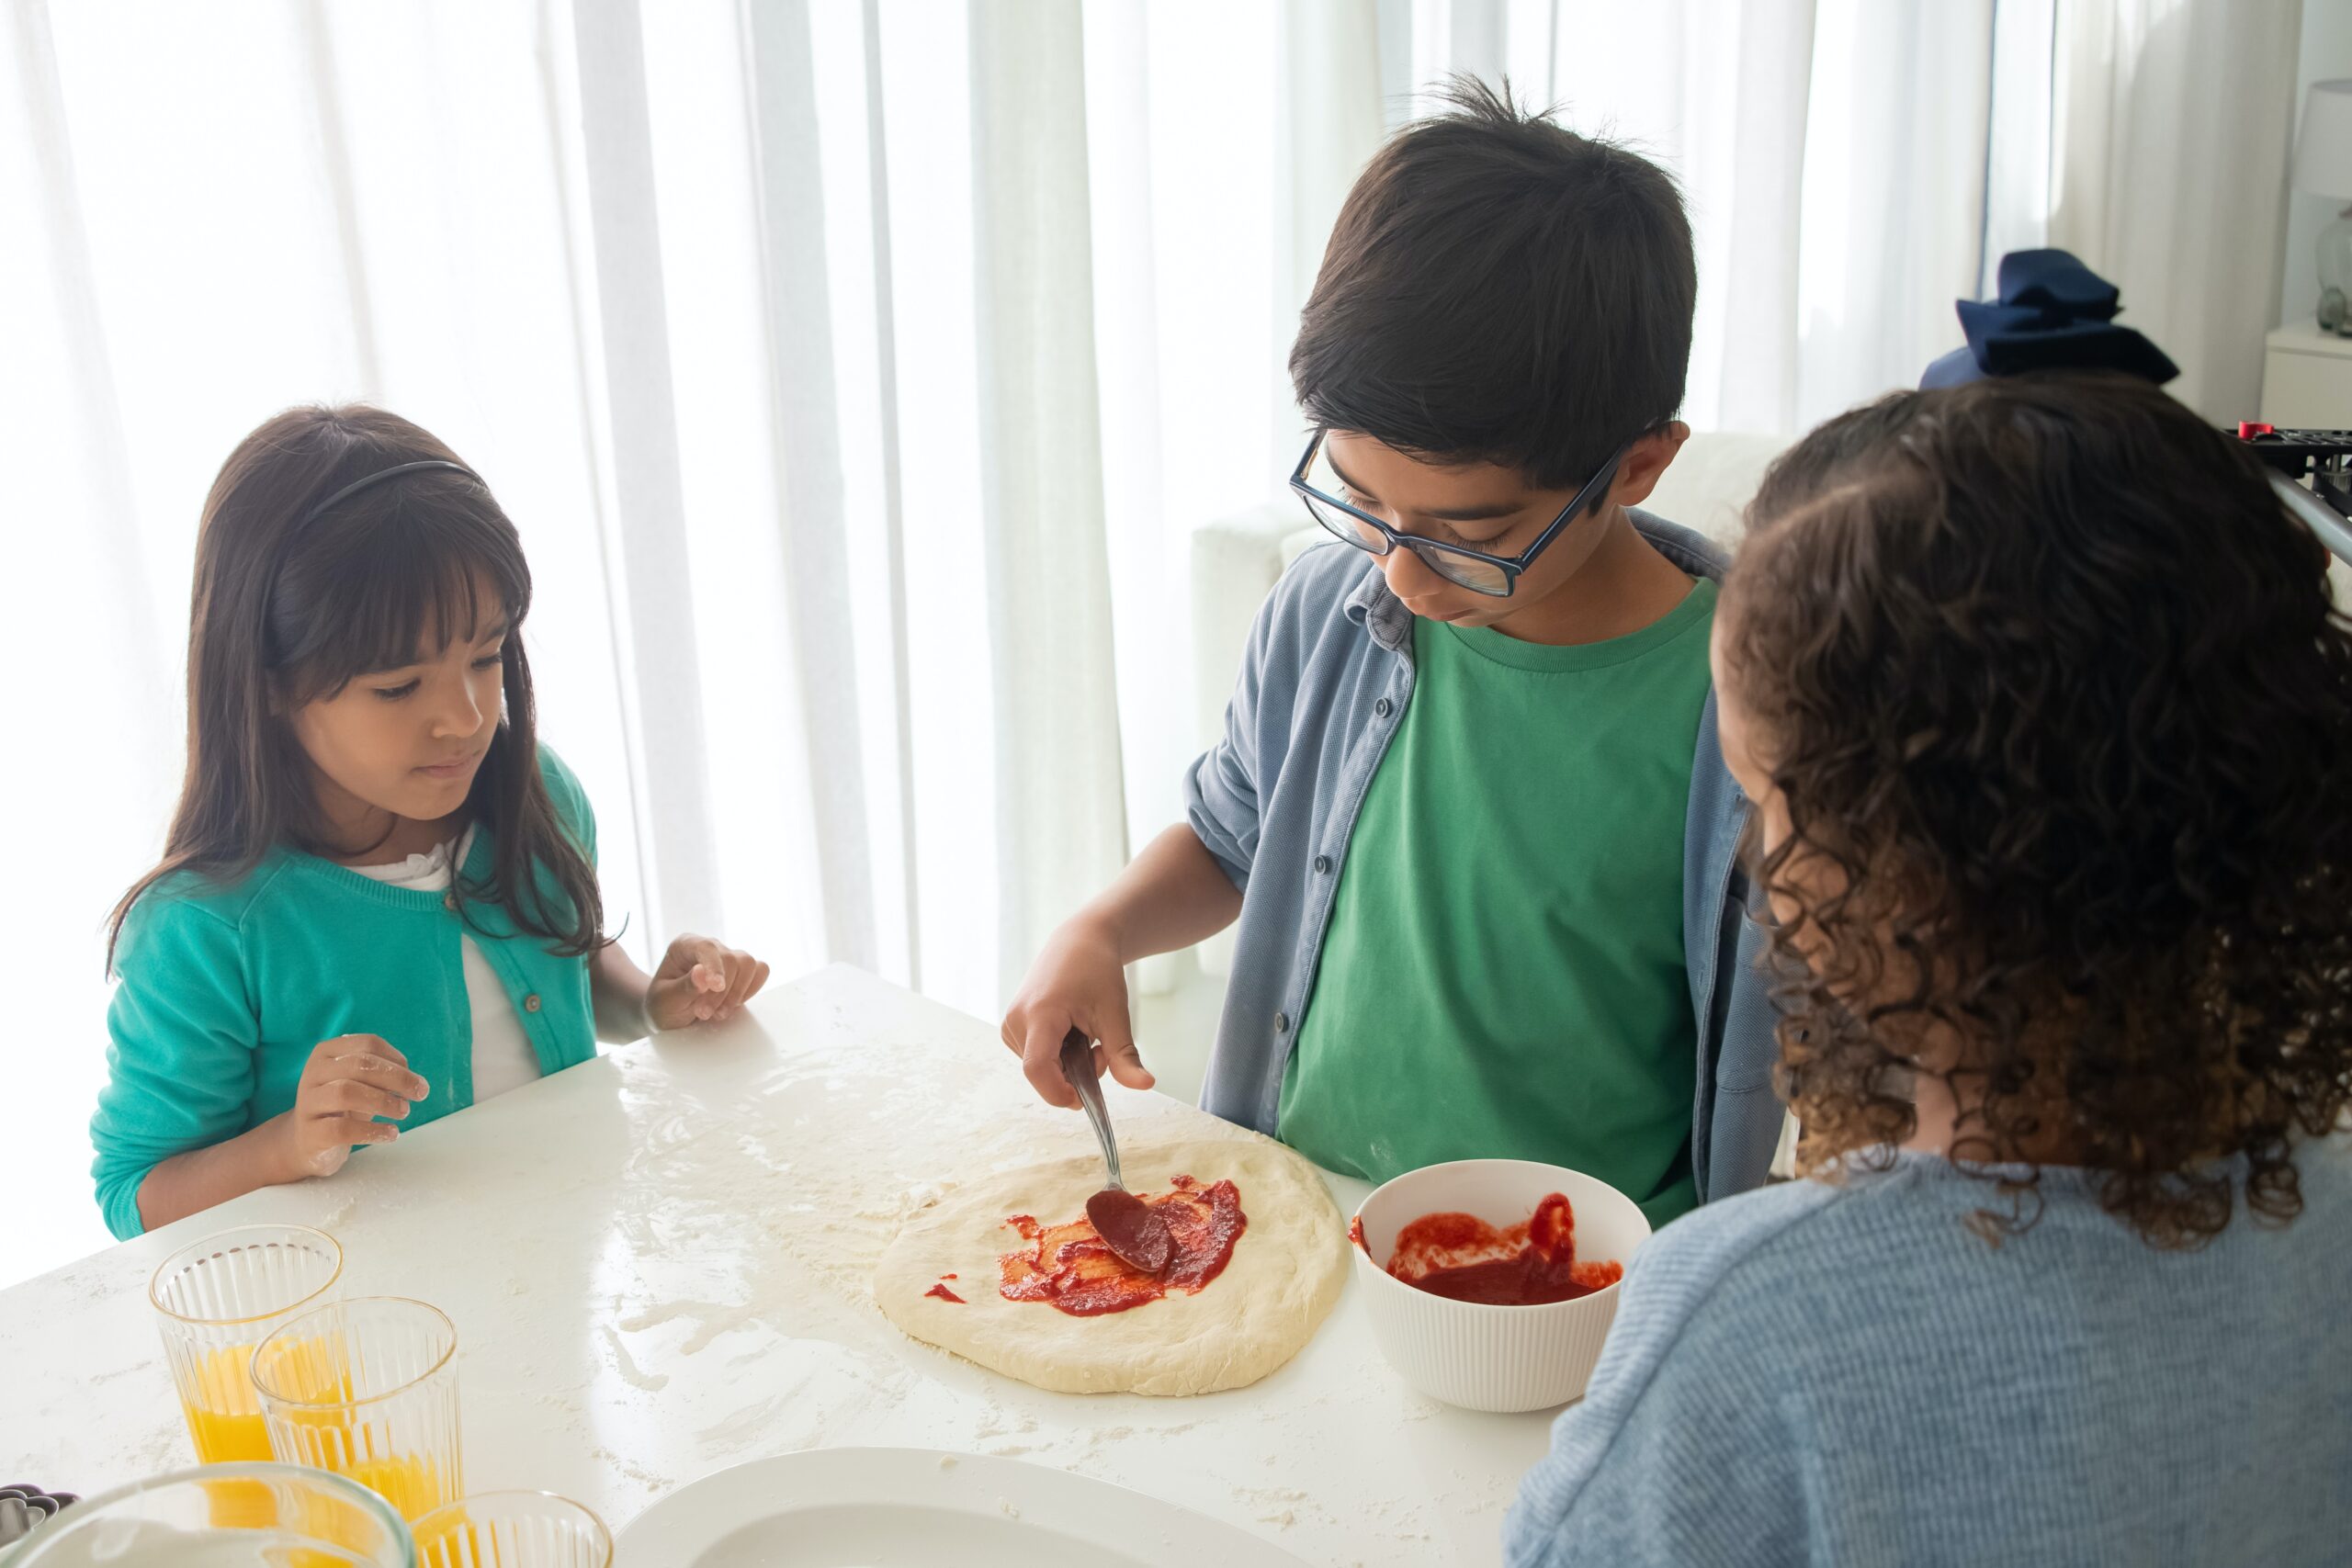 Kids making their own pizza